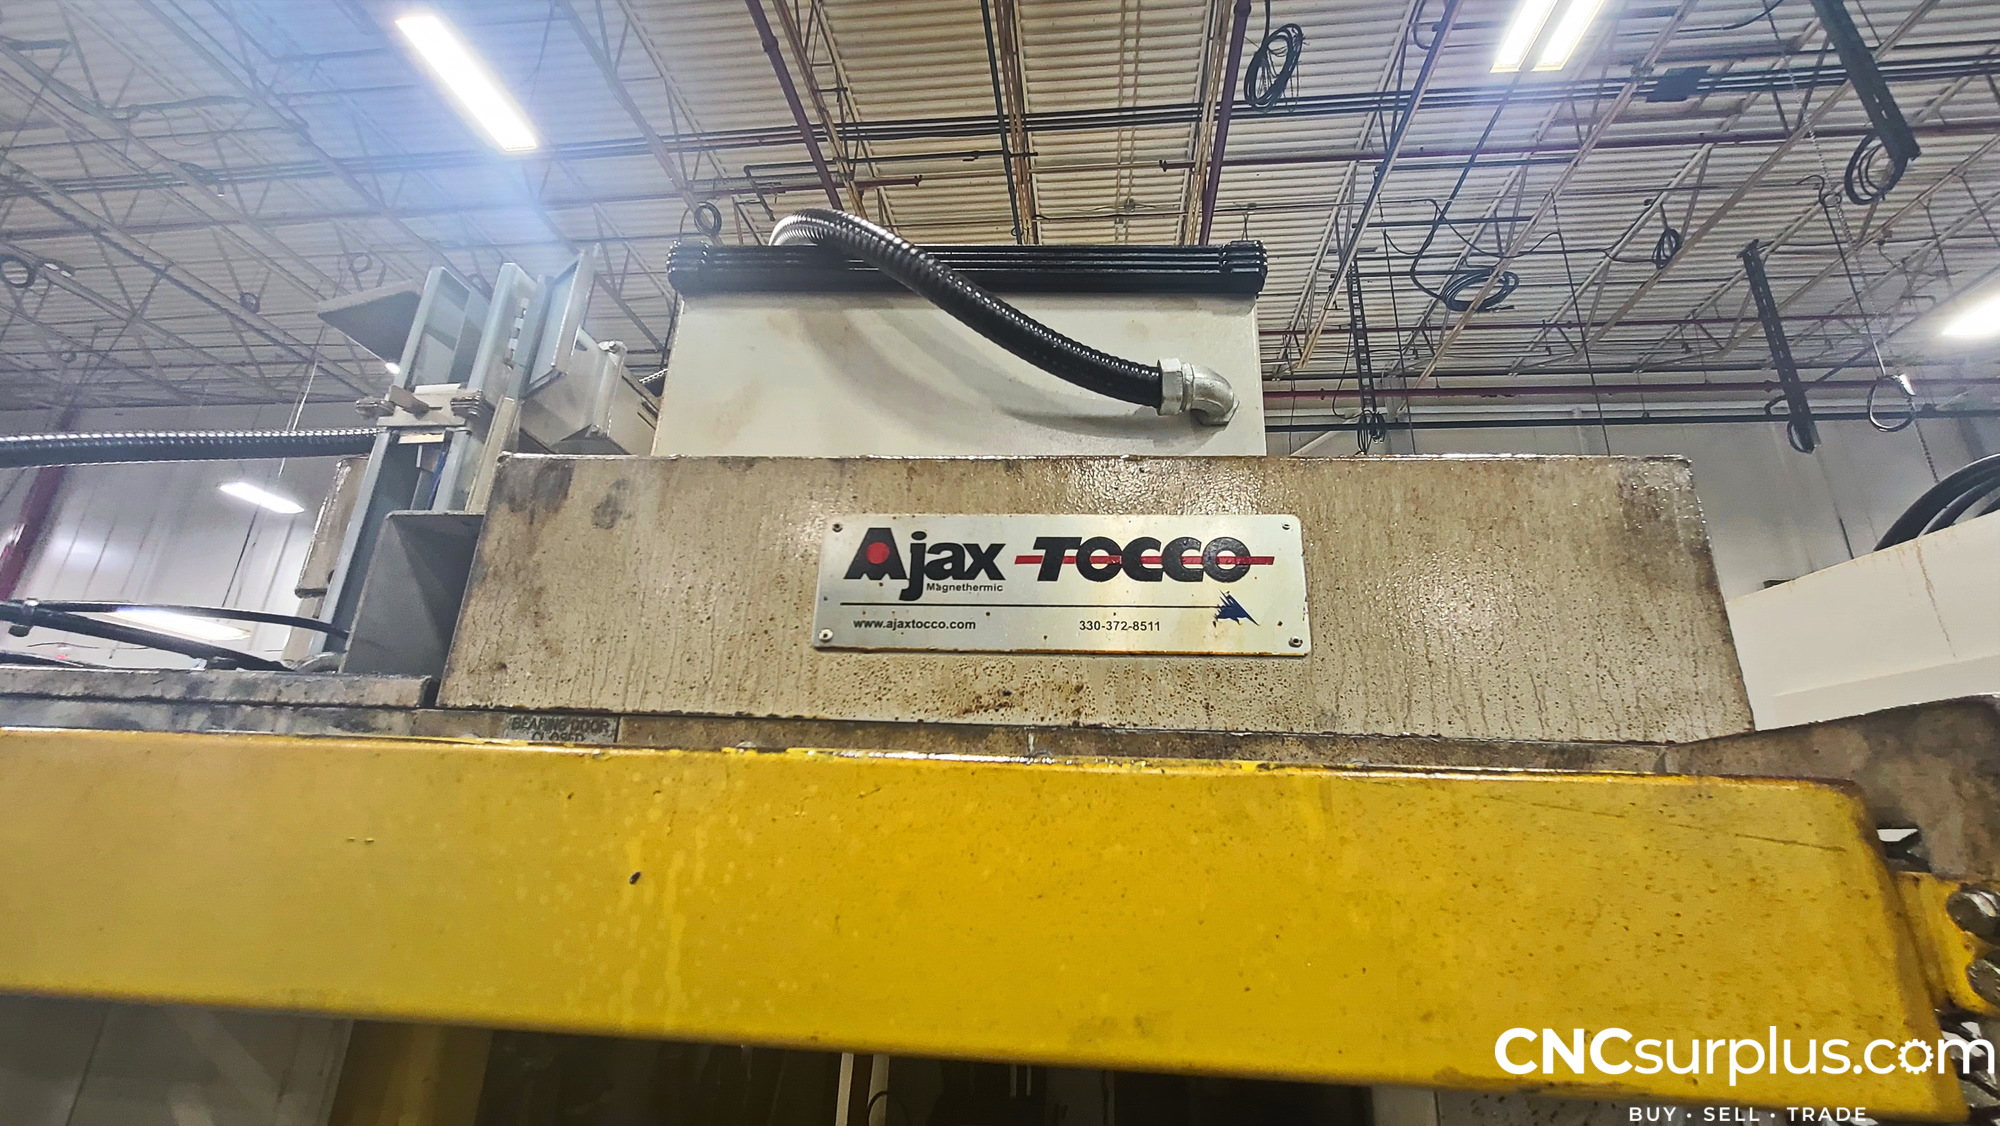 2013 AJAX TOCCO OL-70 Induction Heaters | CNCsurplus, A Div. of Comtex Leasing Corp.